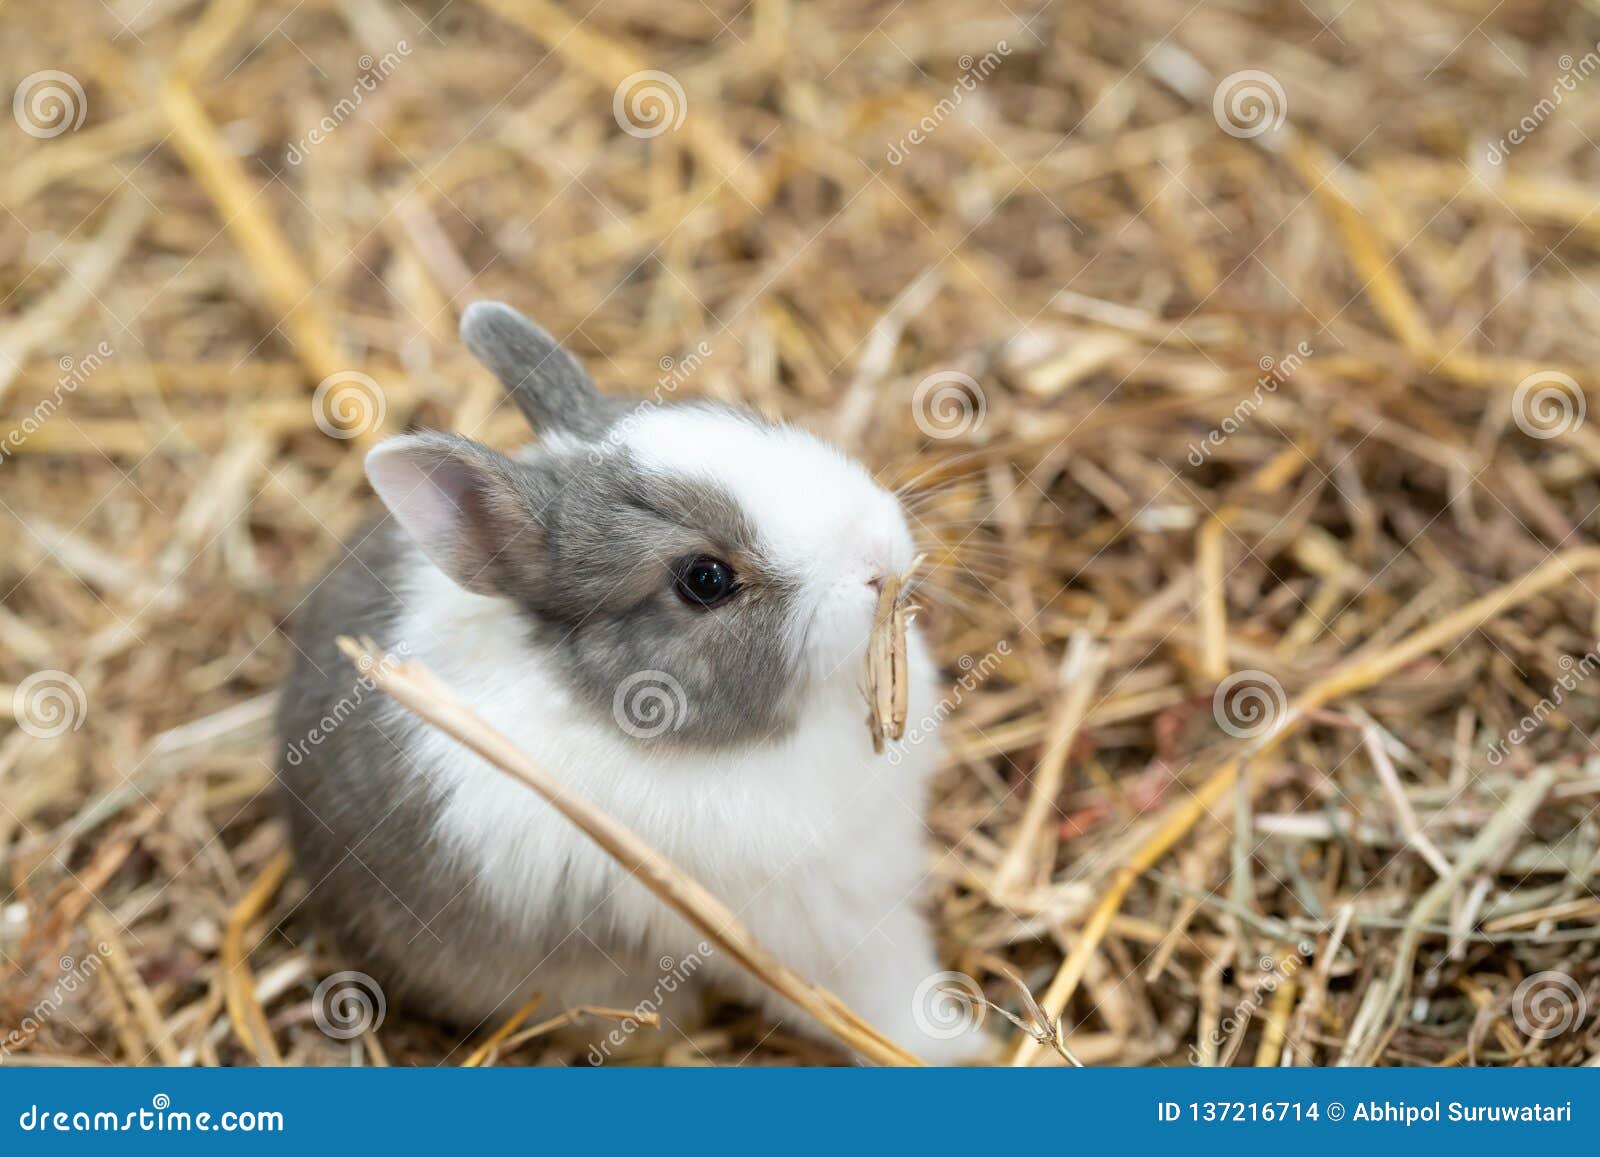 Netherland Dwarf Rabbit Is One Of The Smallest Rabbit Breeds Stock Photo Image Of Nature Farm 137216714